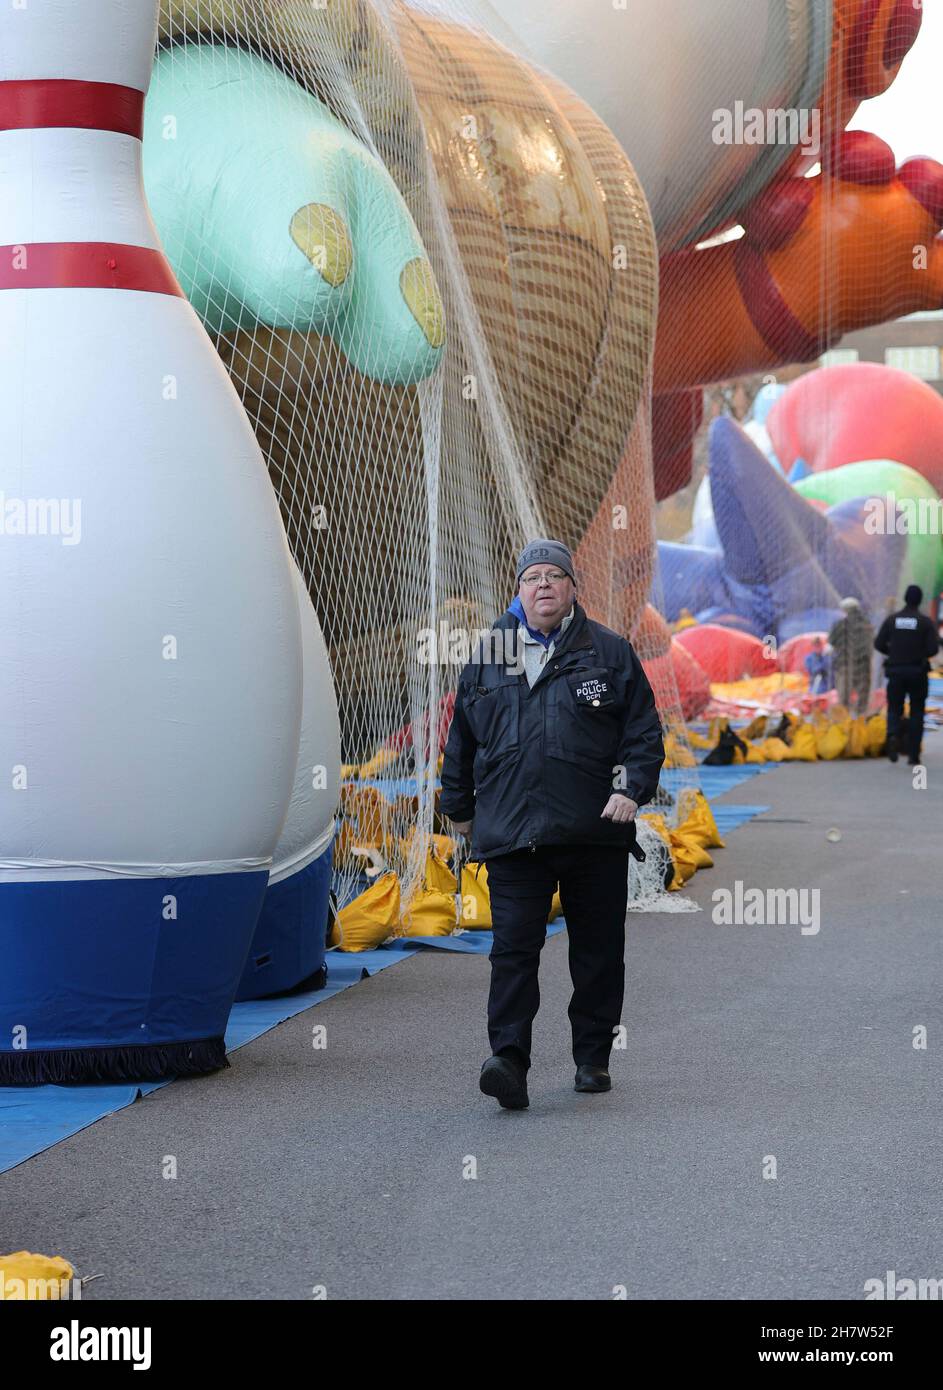 Central Park West, New York, USA, November 24, 2021 - Lieutenant Eugene J. Whyte, DCPI During a Press Conference at the Macys Thanksgiving Day Parade Balloon Inflation Celebration on the Upper West Side of New York City. Photo: Luiz Rampelotto/EuropaNewswire PHOTO CREDIT MANDATORY. Stock Photo